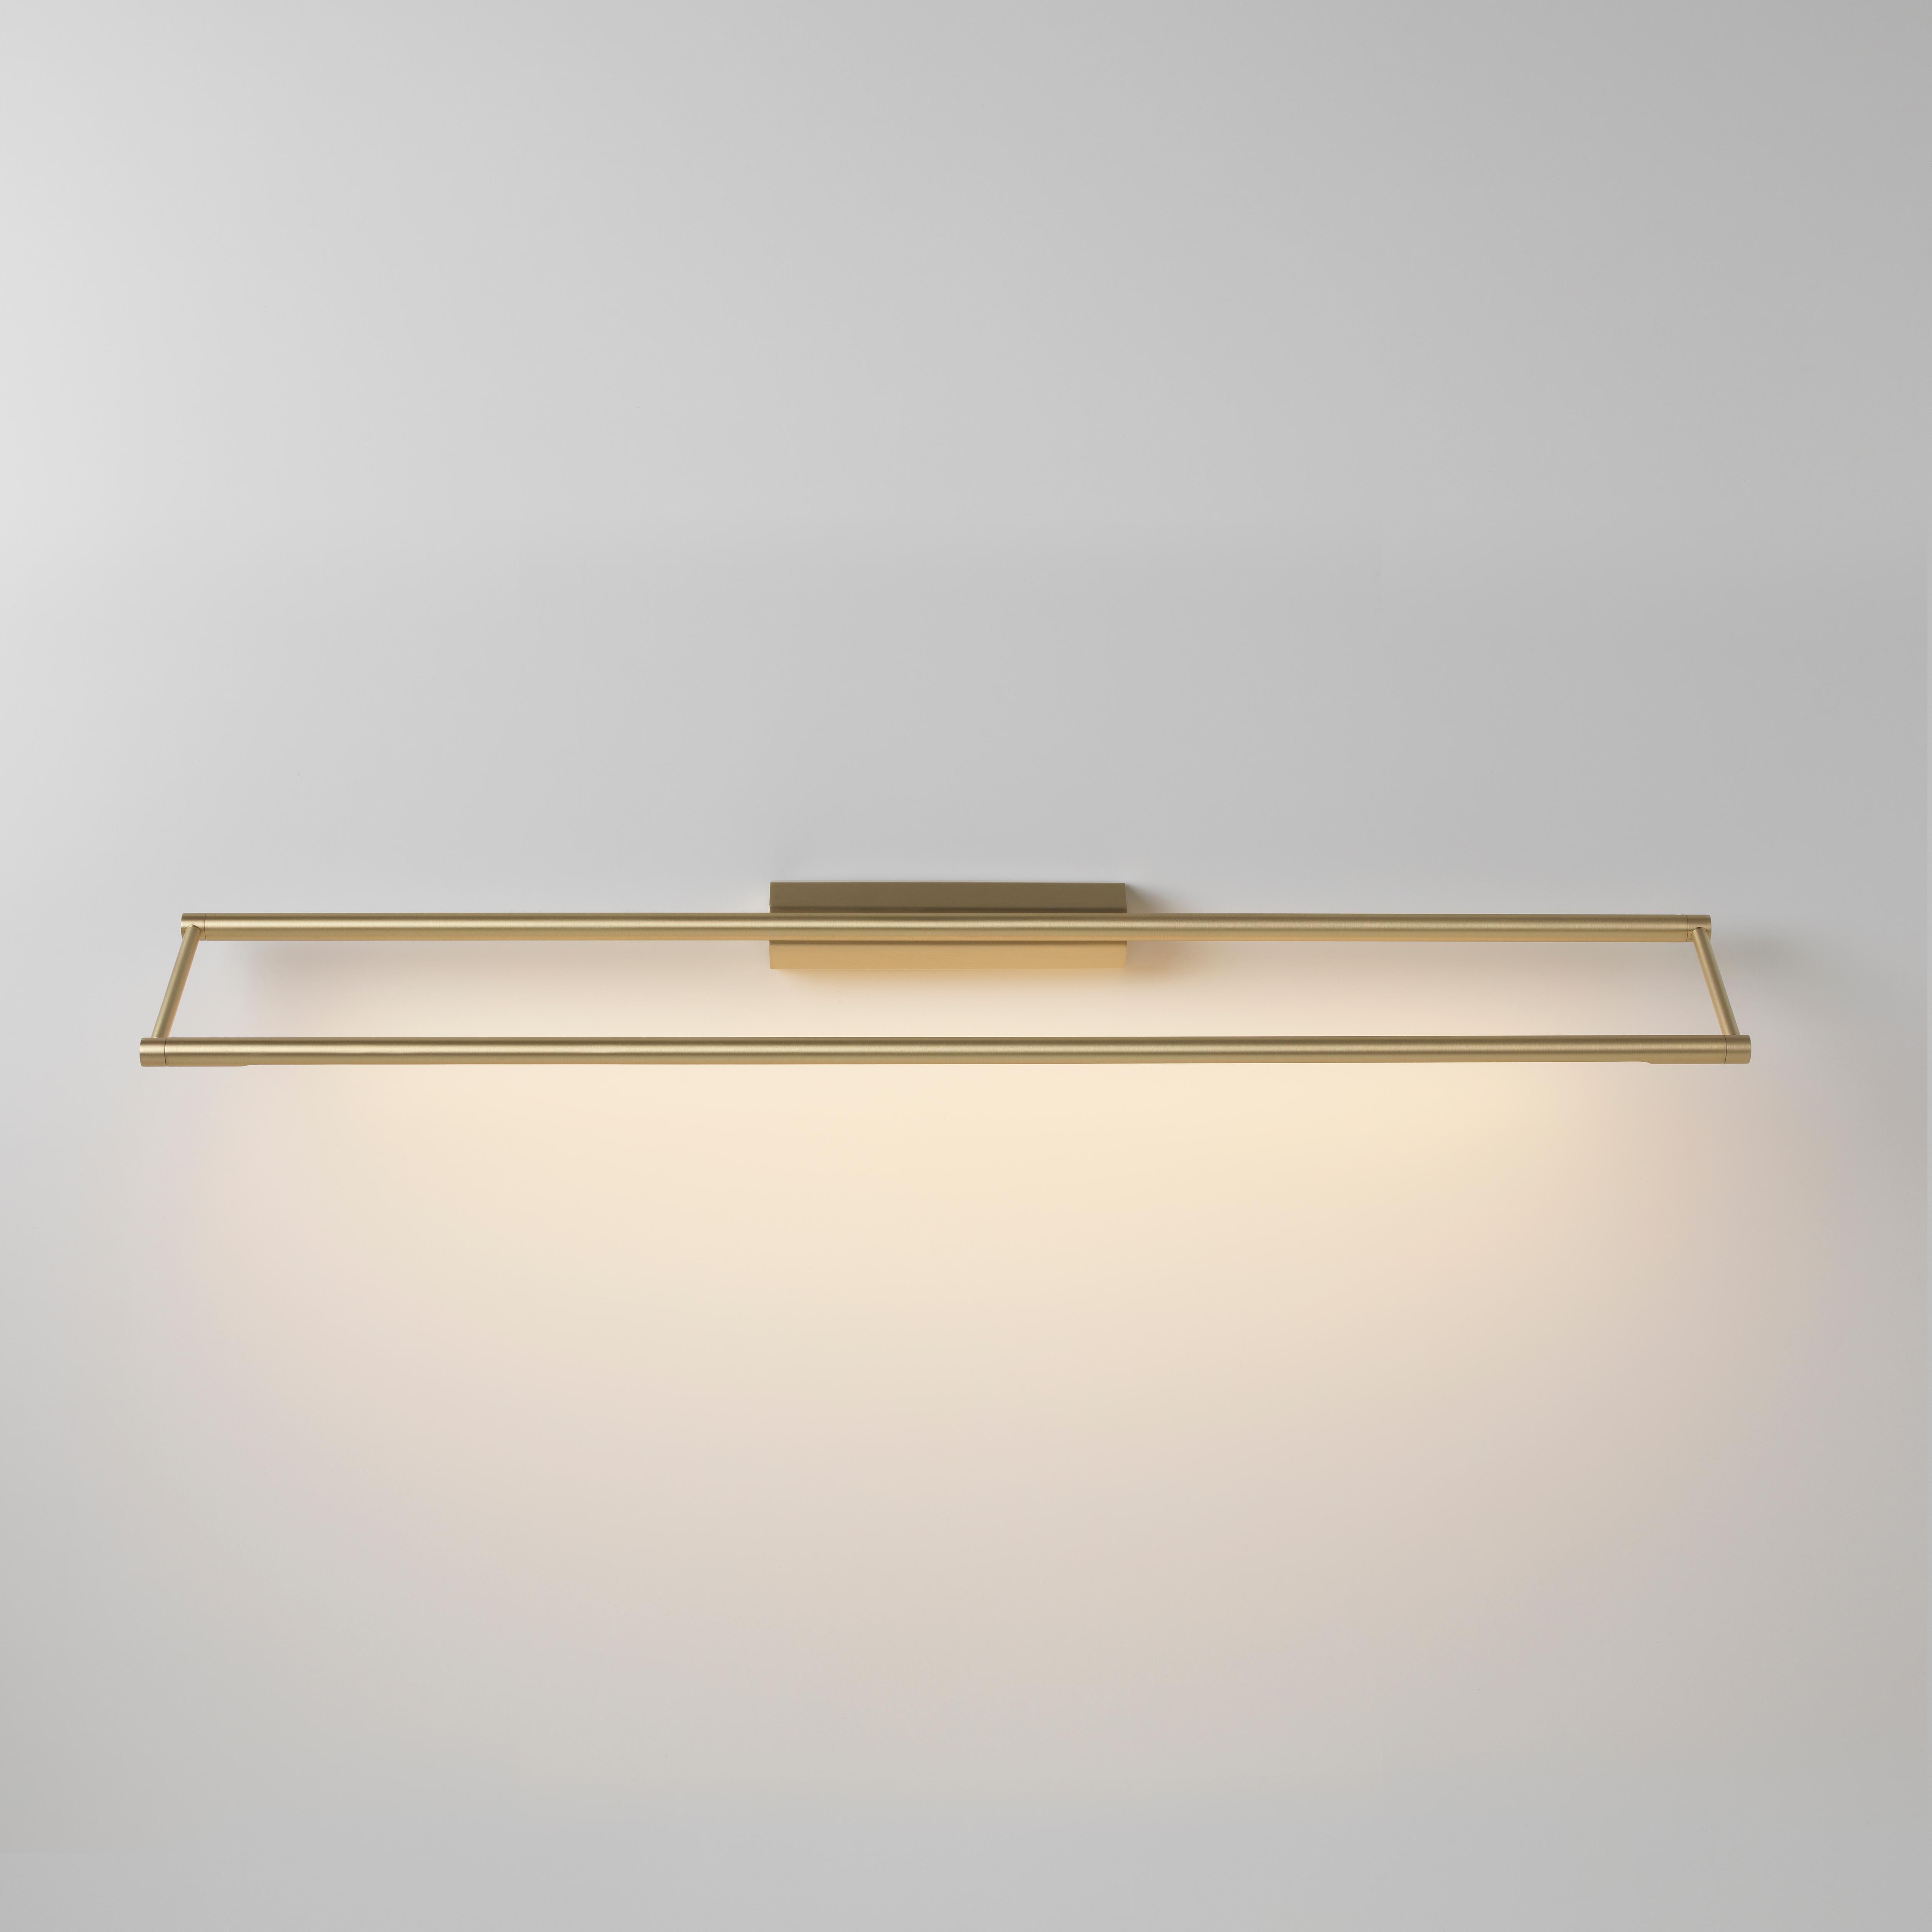 Link 725 brass wall light by Emilie Cathelineau
Dimensions: D 72.5 x W 11.5 x H 4.4 cm
Materials: Solid brass, Satin Polycarbonate diffuser, Black textile cable (2m)
Others finishes and dimensions are available.

All our lamps can be wired